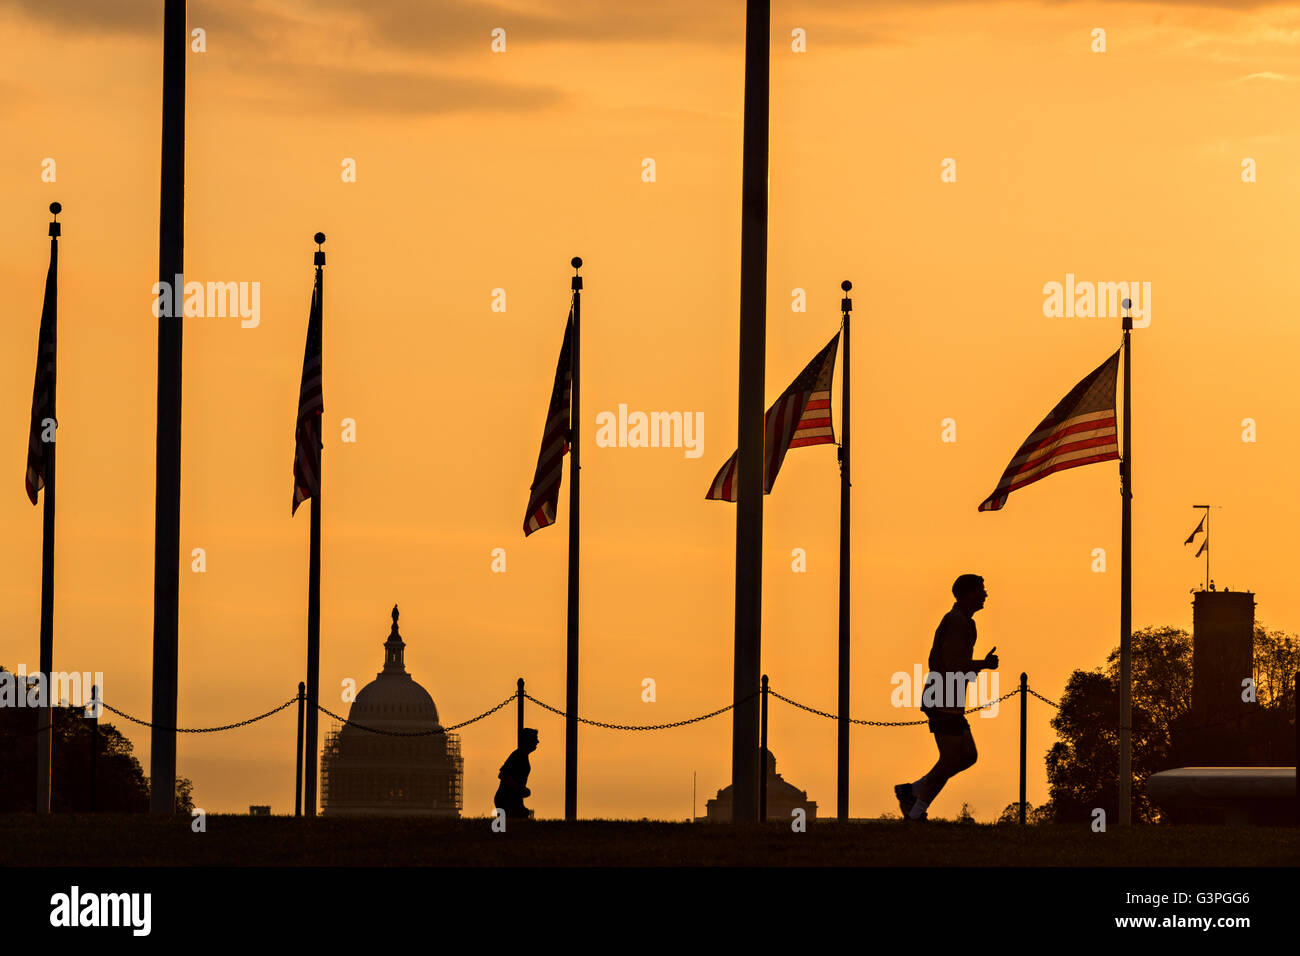 A runner passes flags around the Washington Monument silhouetted by sunset in Washington, DC. Stock Photo